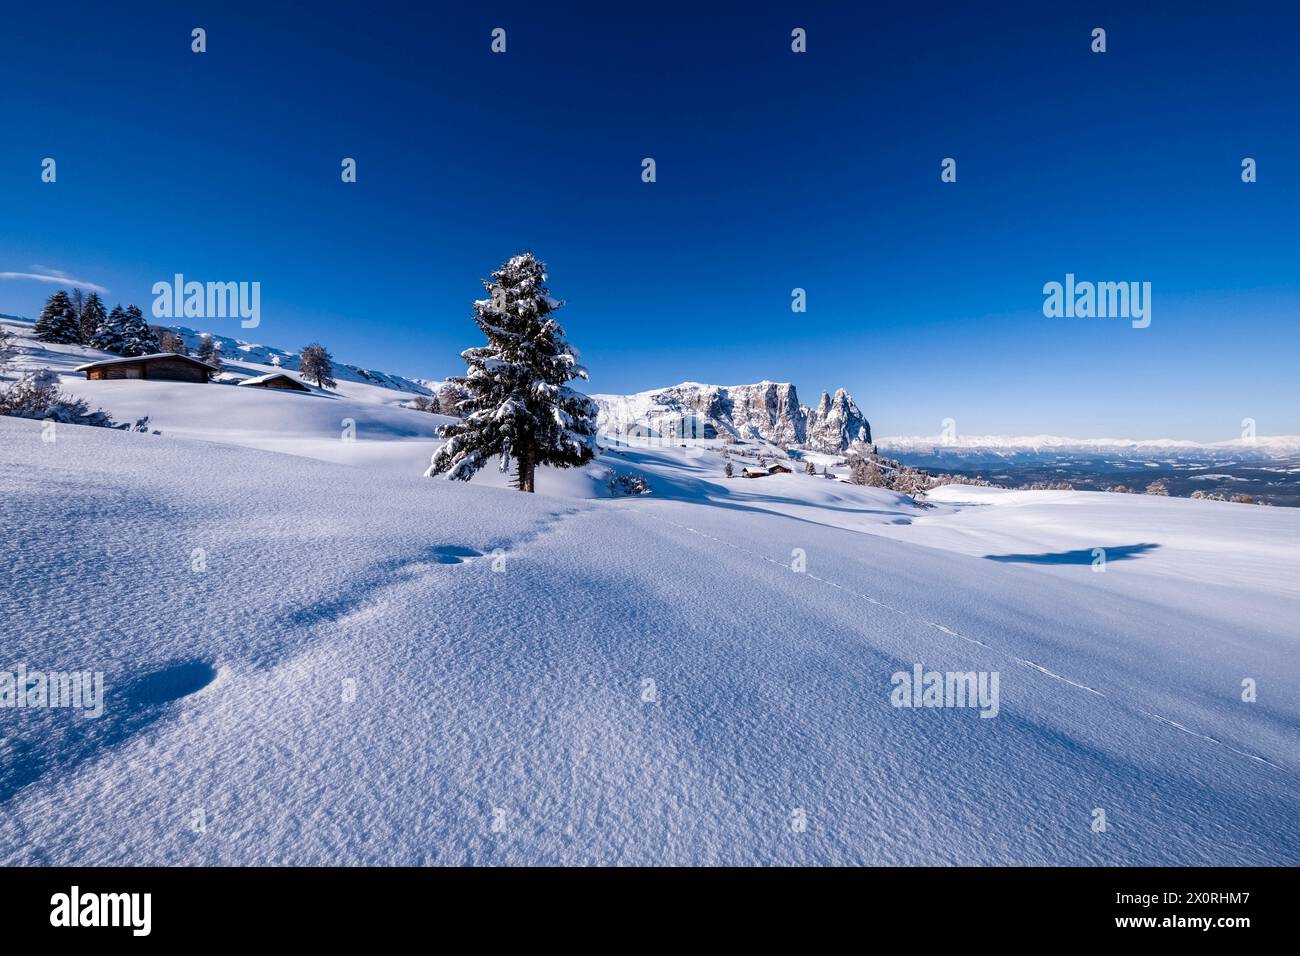 Hilly agricultural countryside with snow-covered pastures, trees and wooden huts at Seiser Alm in winter, summits of Monte Petz and Sciliar in the dis Stock Photo